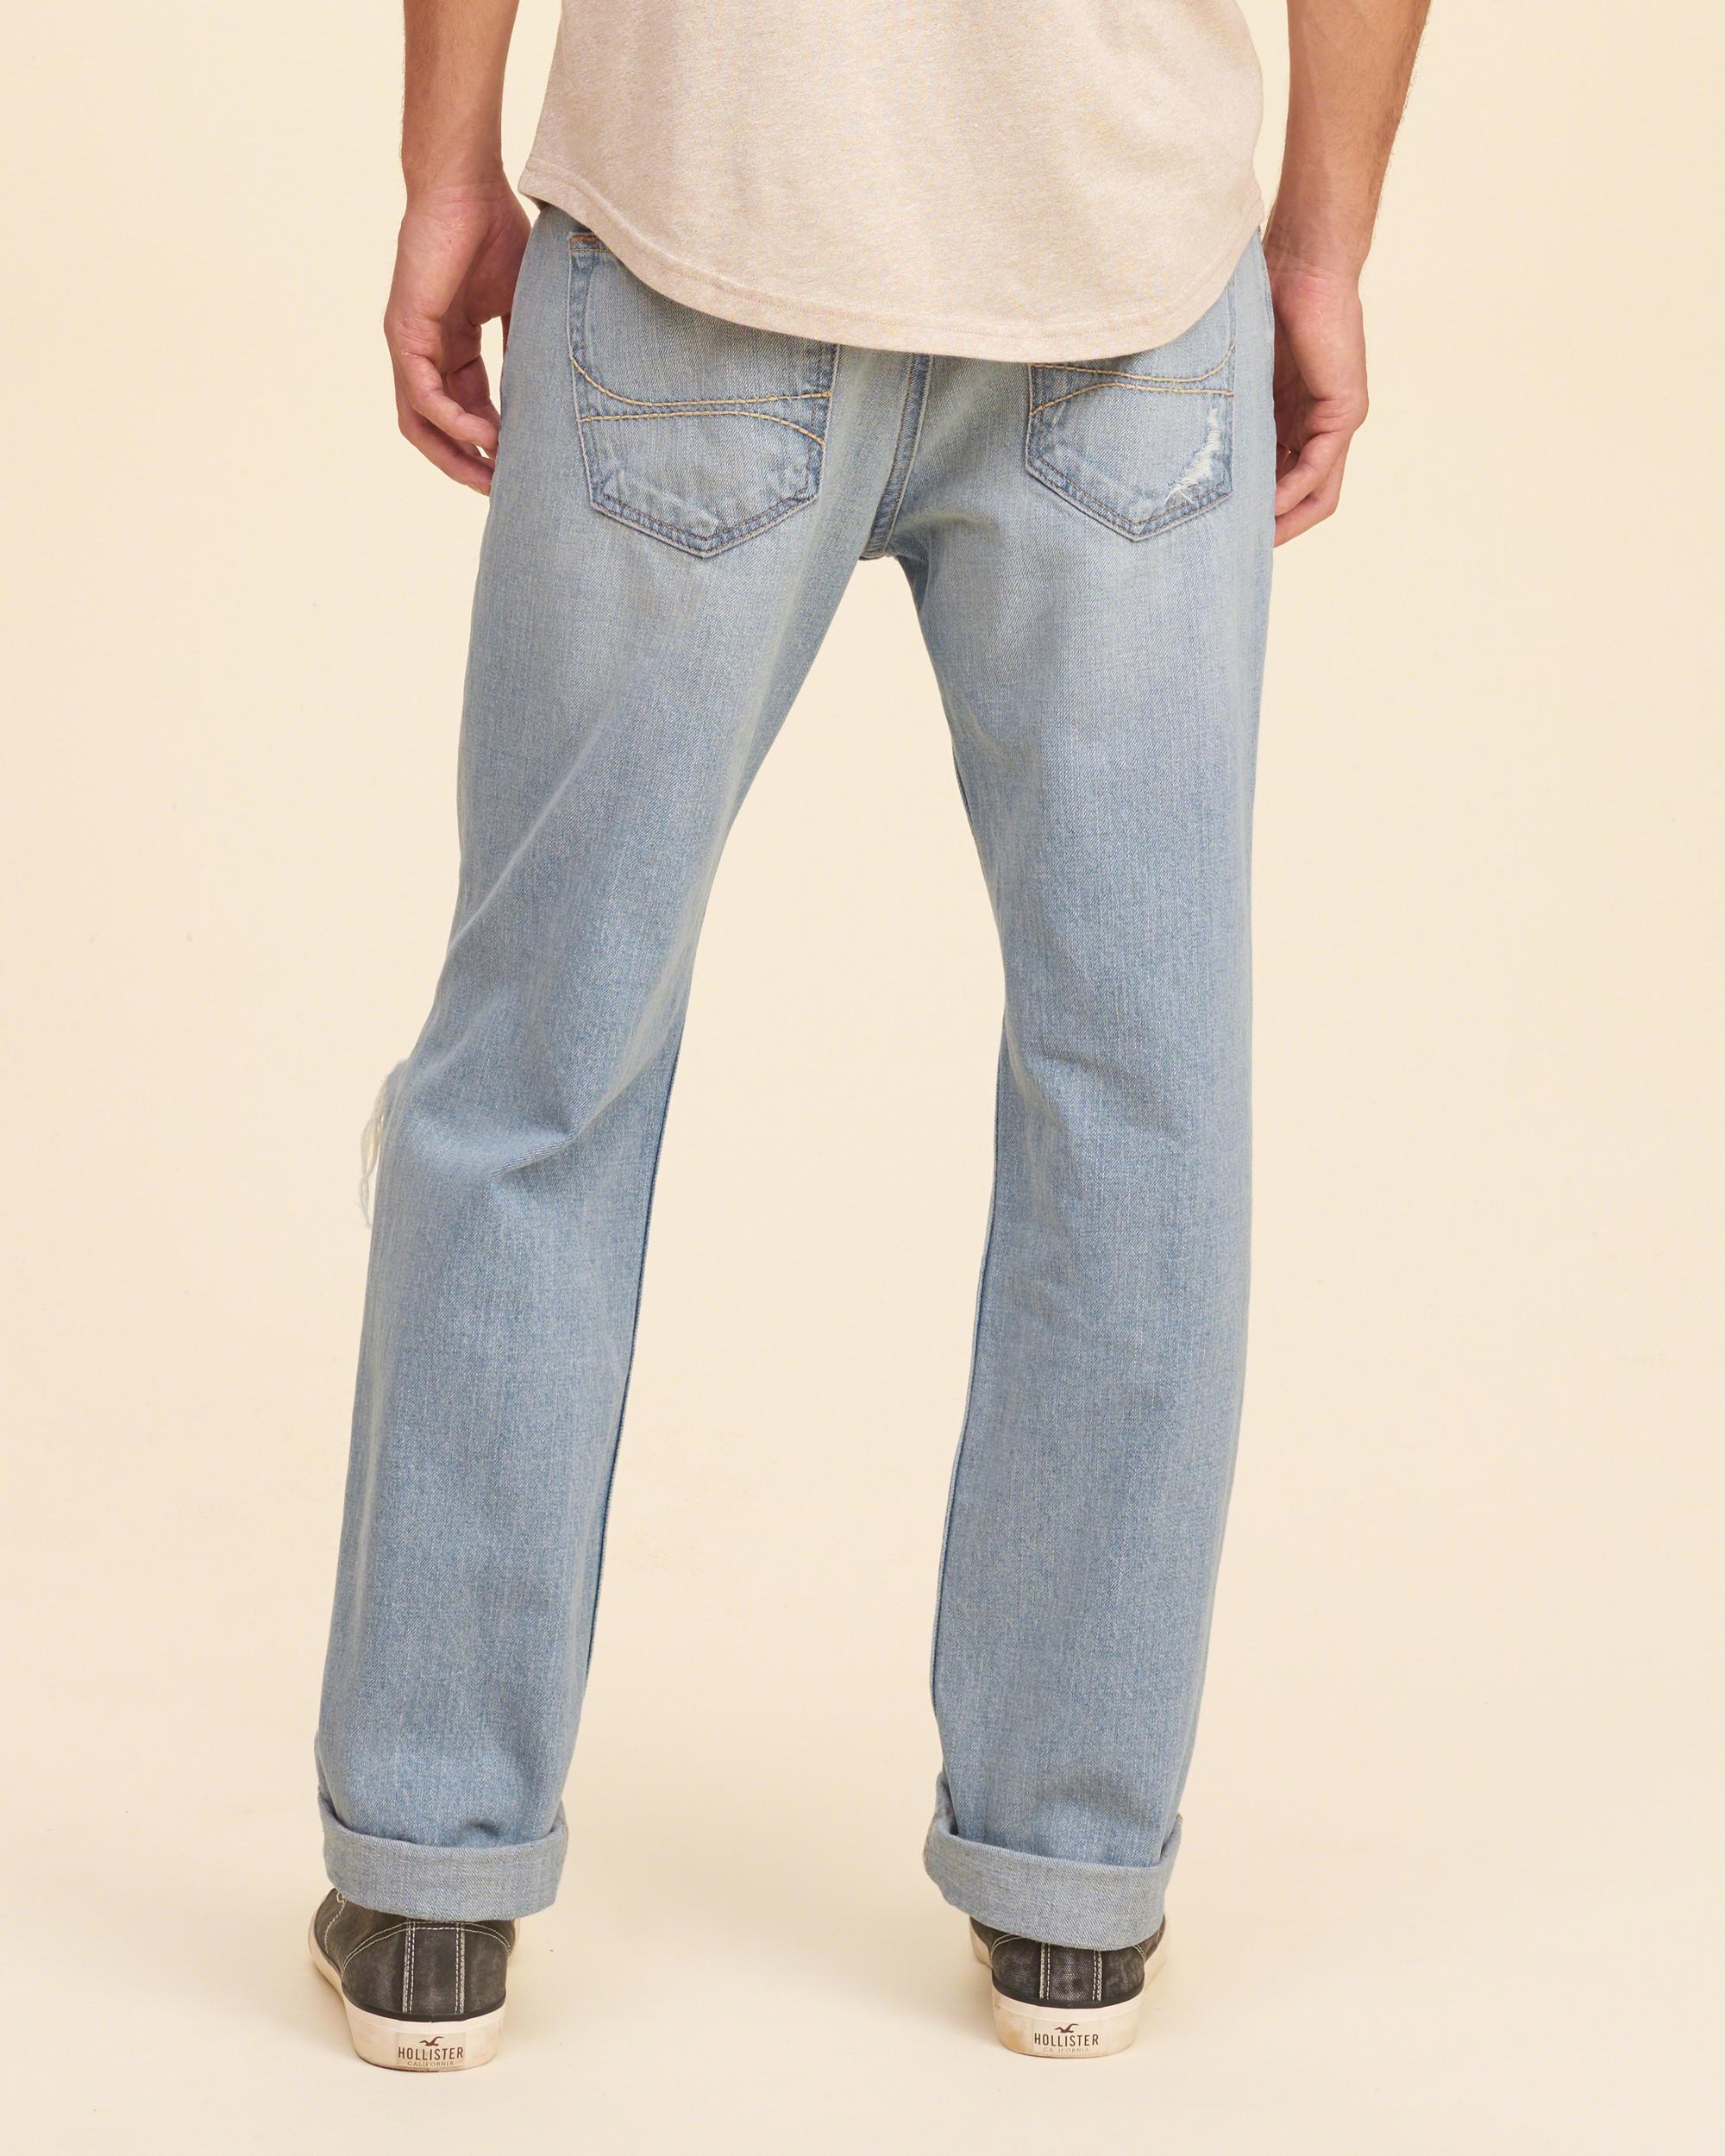 Lyst - Hollister Classic Straight Jeans in Blue for Men